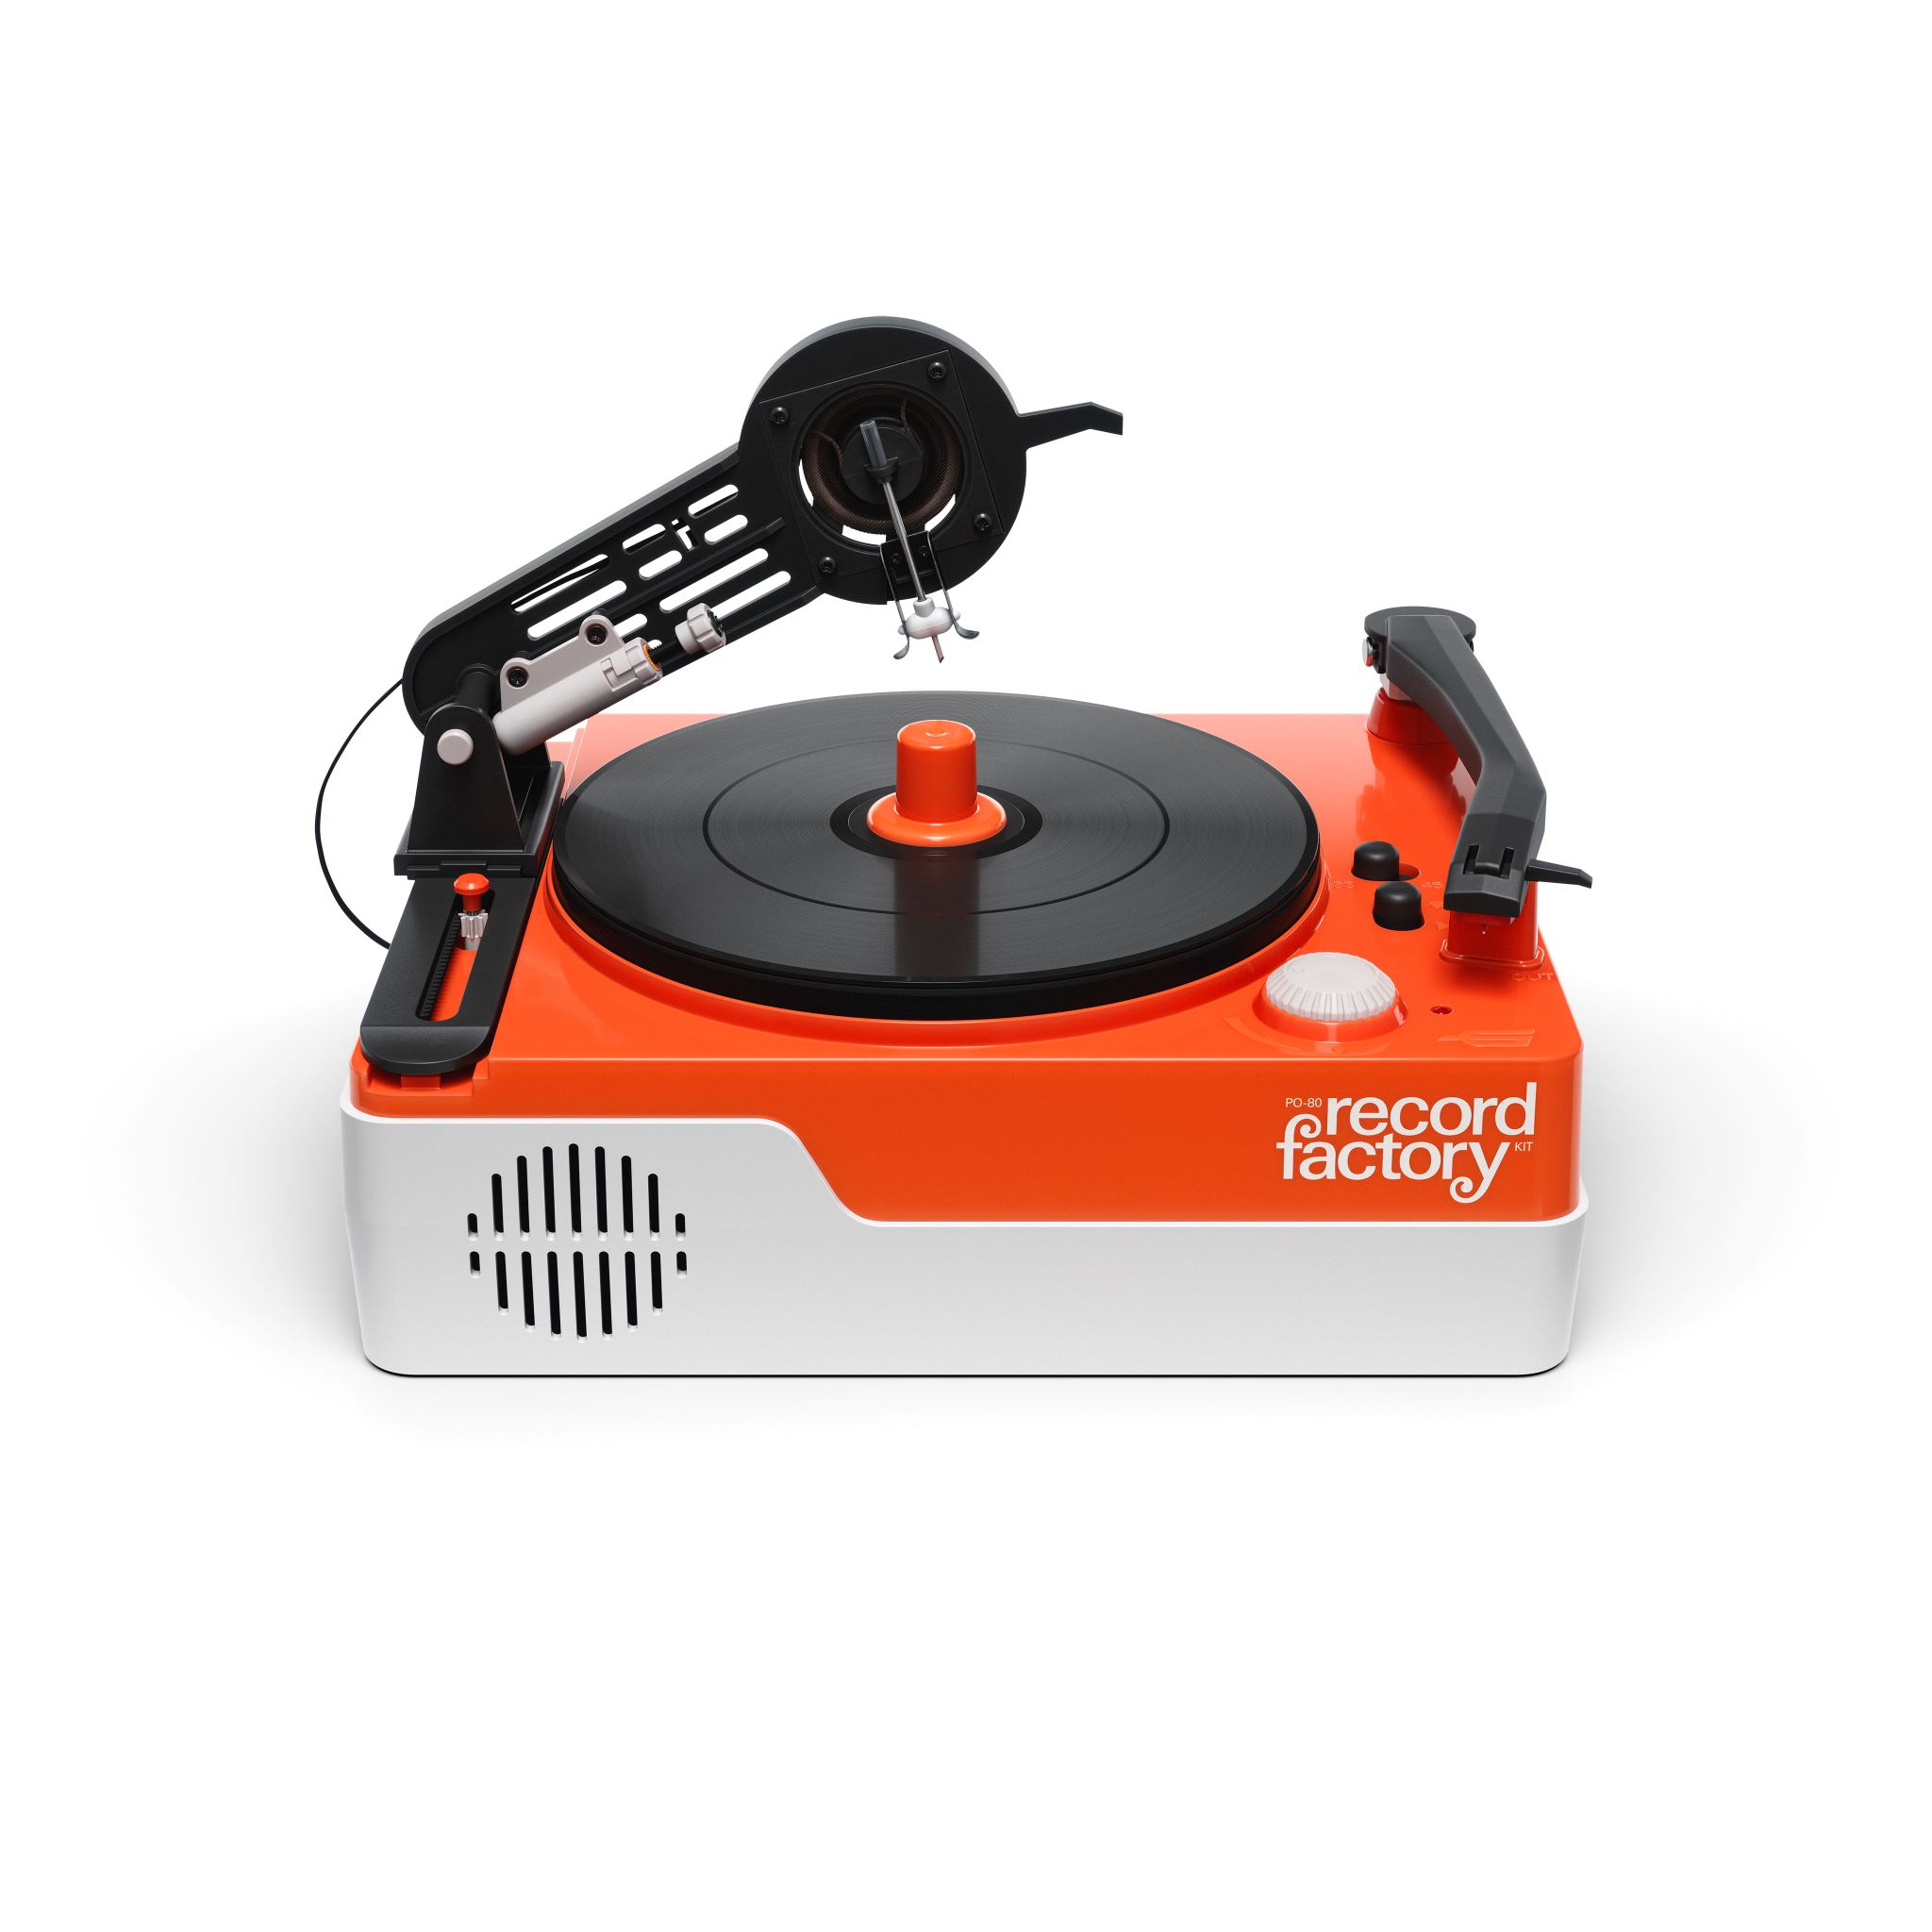 Make your own vinyl records with this tiny vinyl creator